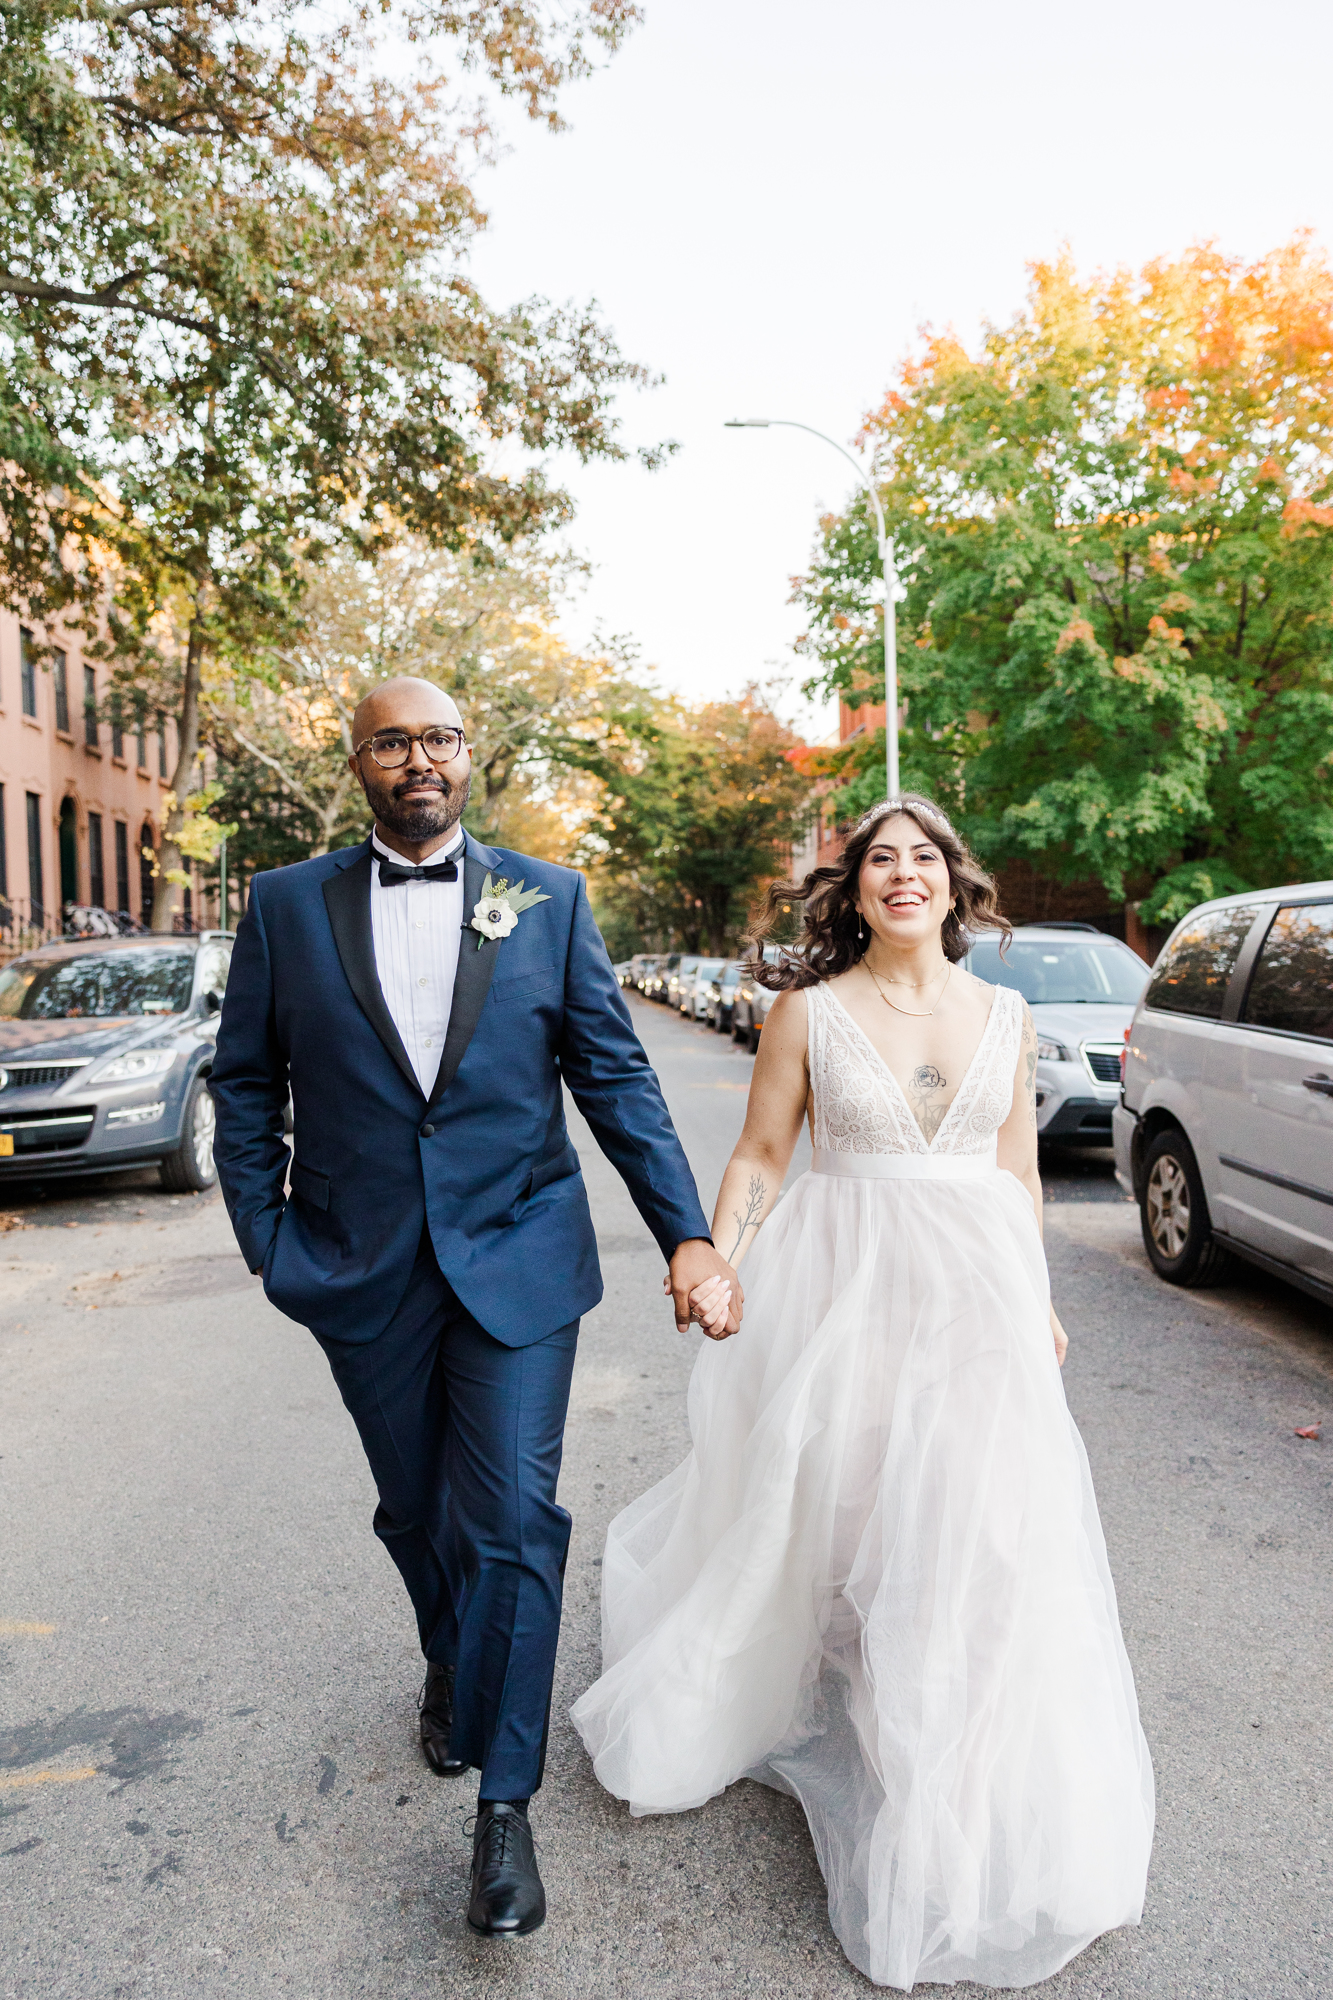 Lovely Deity Wedding Photography at Unique Event Space in Downtown Brooklyn in Autumn